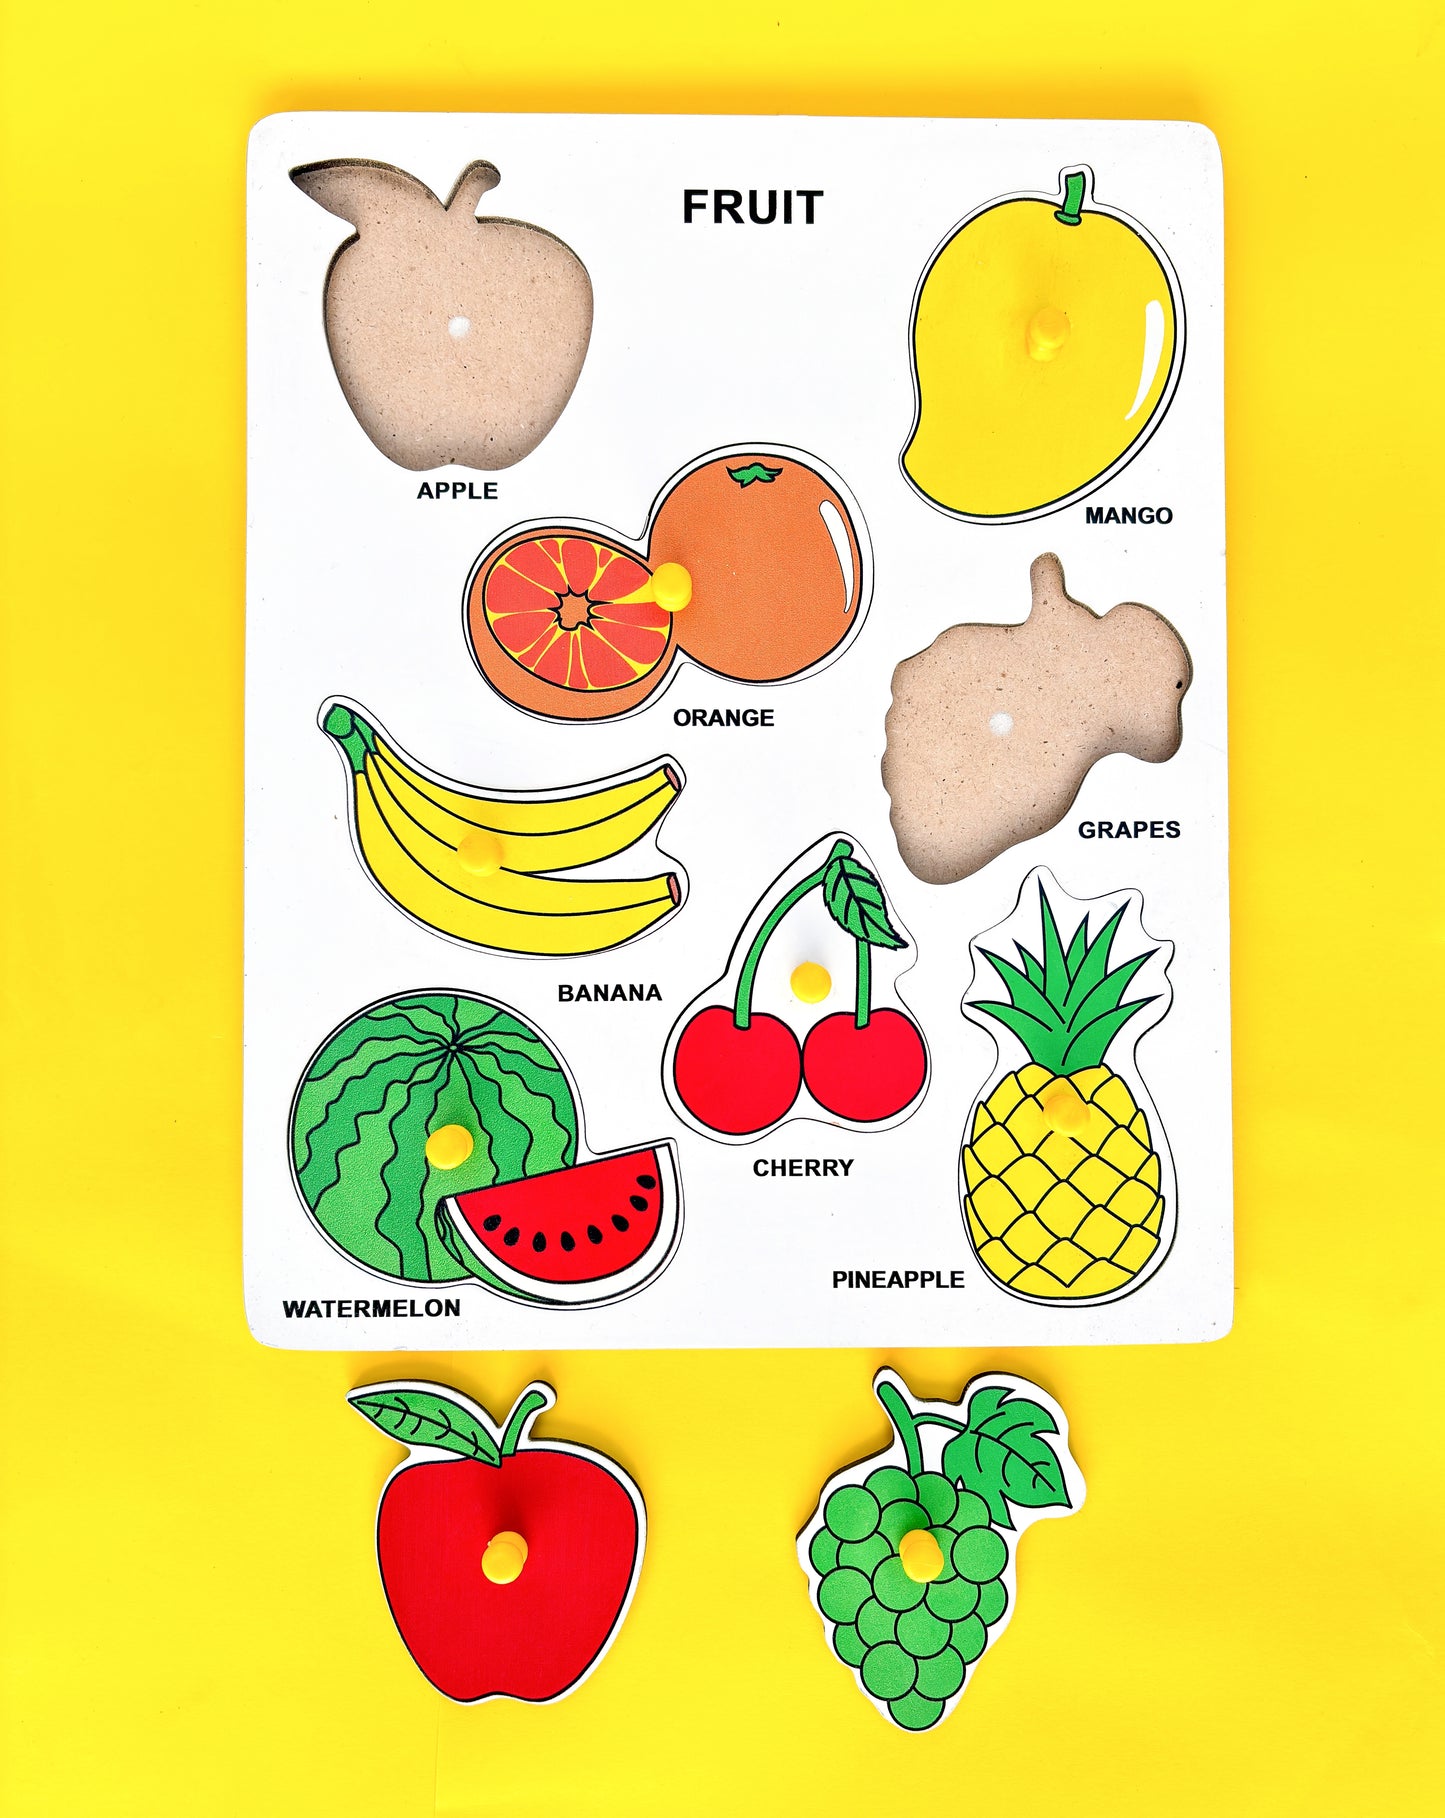  Wooden puzzle with colorful fruit shapes on a yellow background. The text “FRUIT” is displayed at the top of the puzzle, followed by the names of six fruits pictured below: APPLE, MANGO, ORANGE, GRAPES, BANANA, and CHERRY.  WATERMELON and PINEAPPLE are displayed on the right and left side of the puzzle, respectively. This educational toy helps young children learn about different fruits and identify their shapes. 